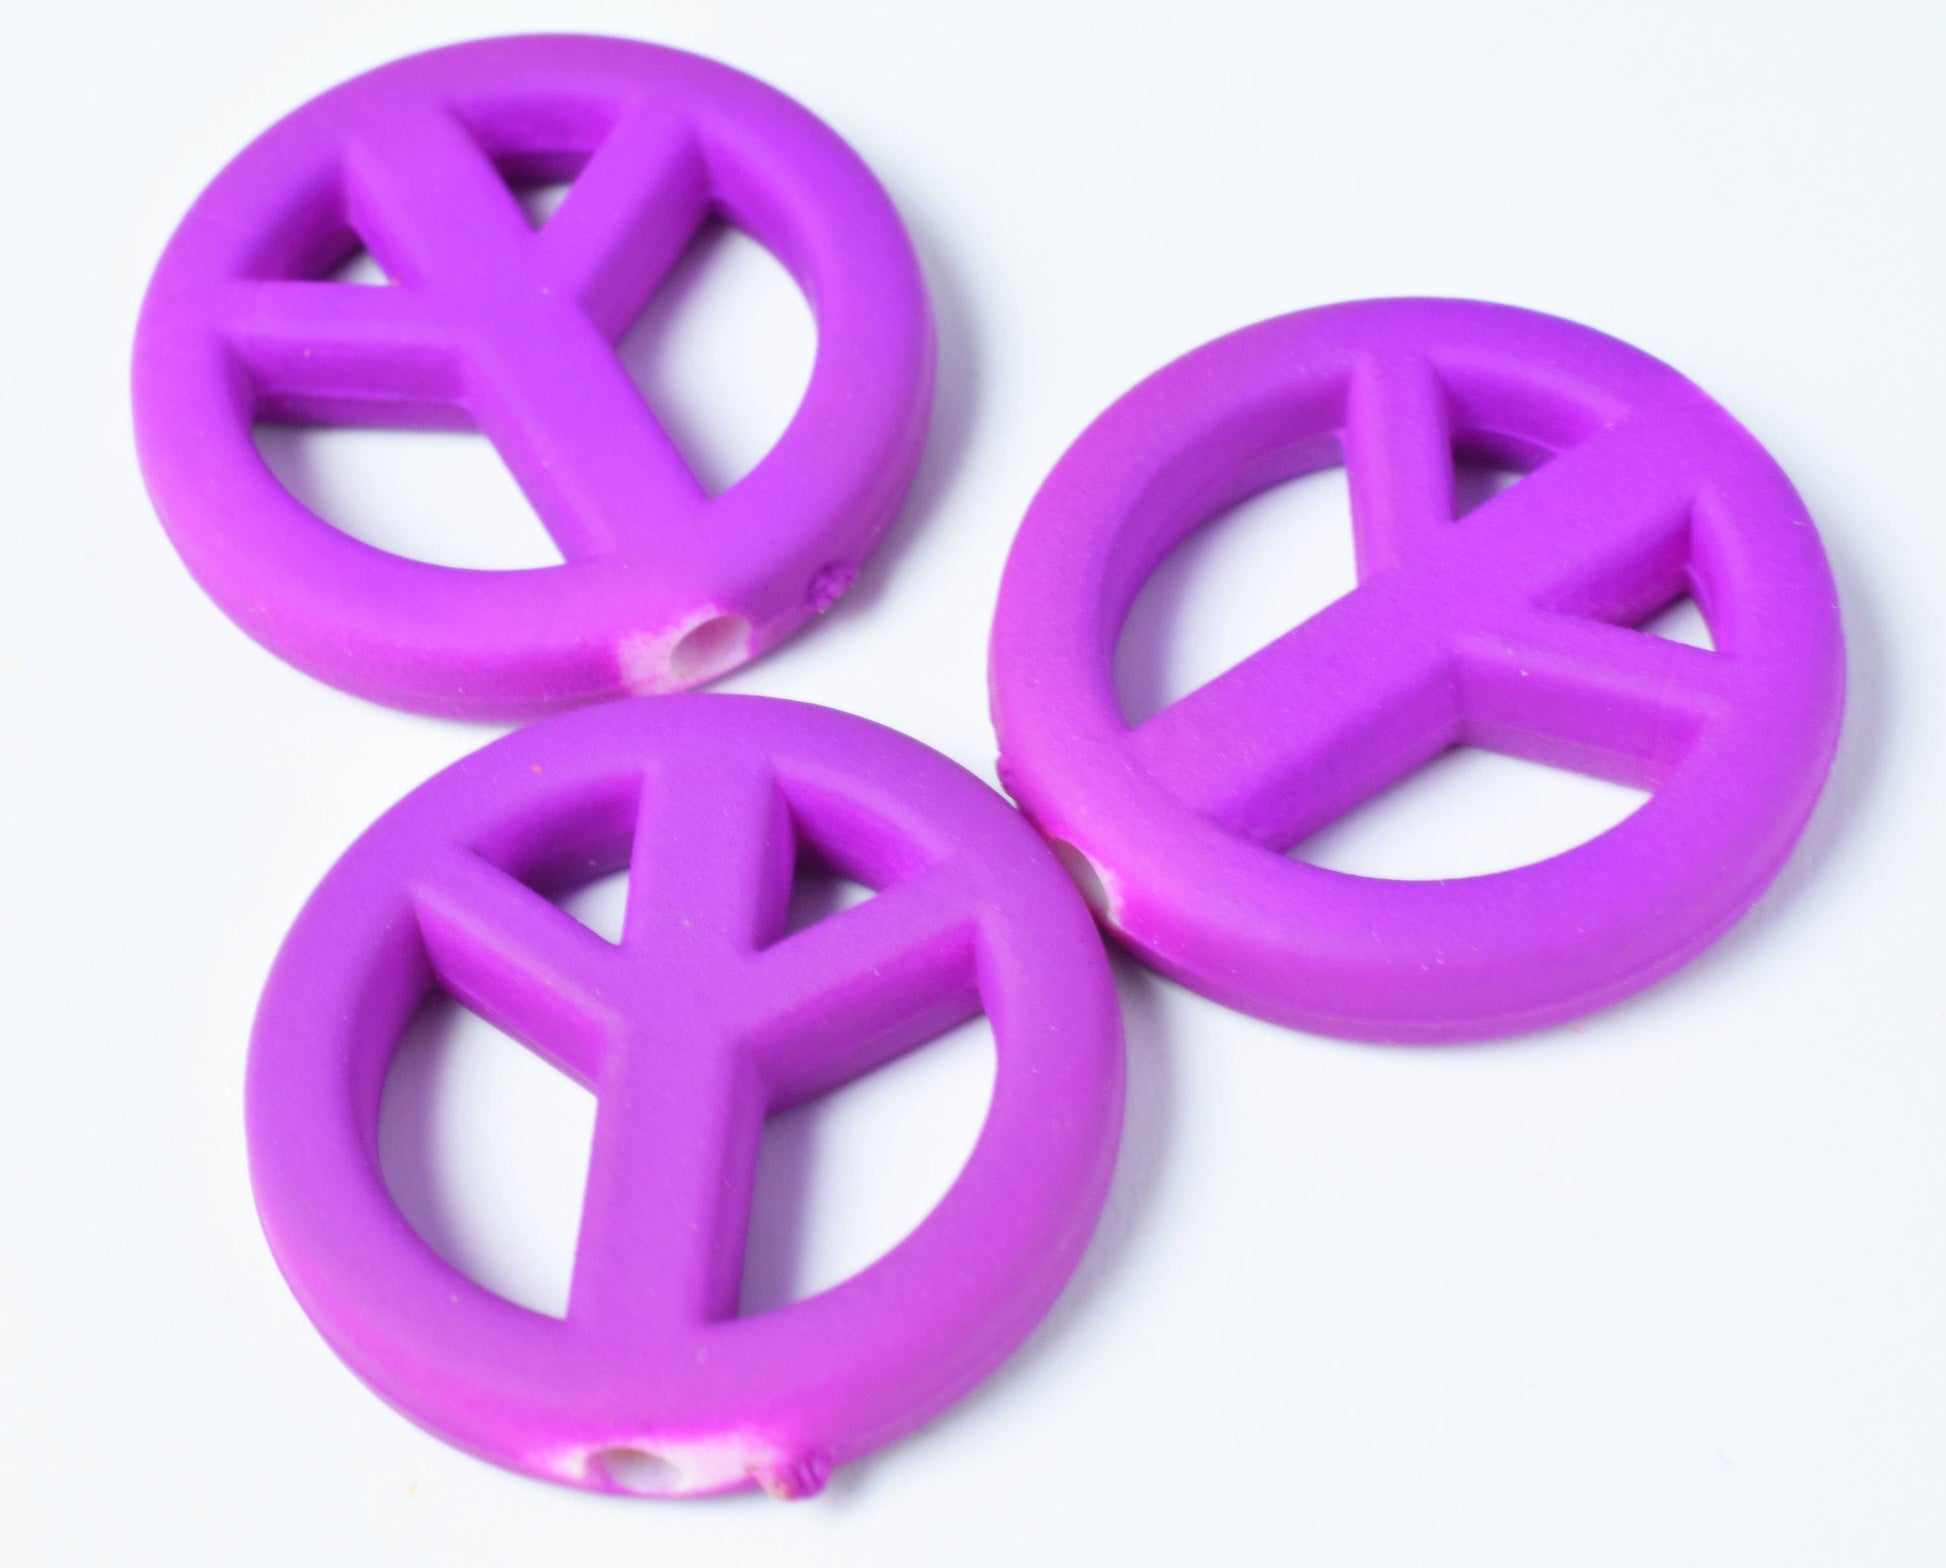 20/17mm Matte Rubberized Colorful Plastic Peace Symbol Beads,Clay Peace Beads,Acrylic Beads,Necklace beads,Rubberized Beads Jewelry